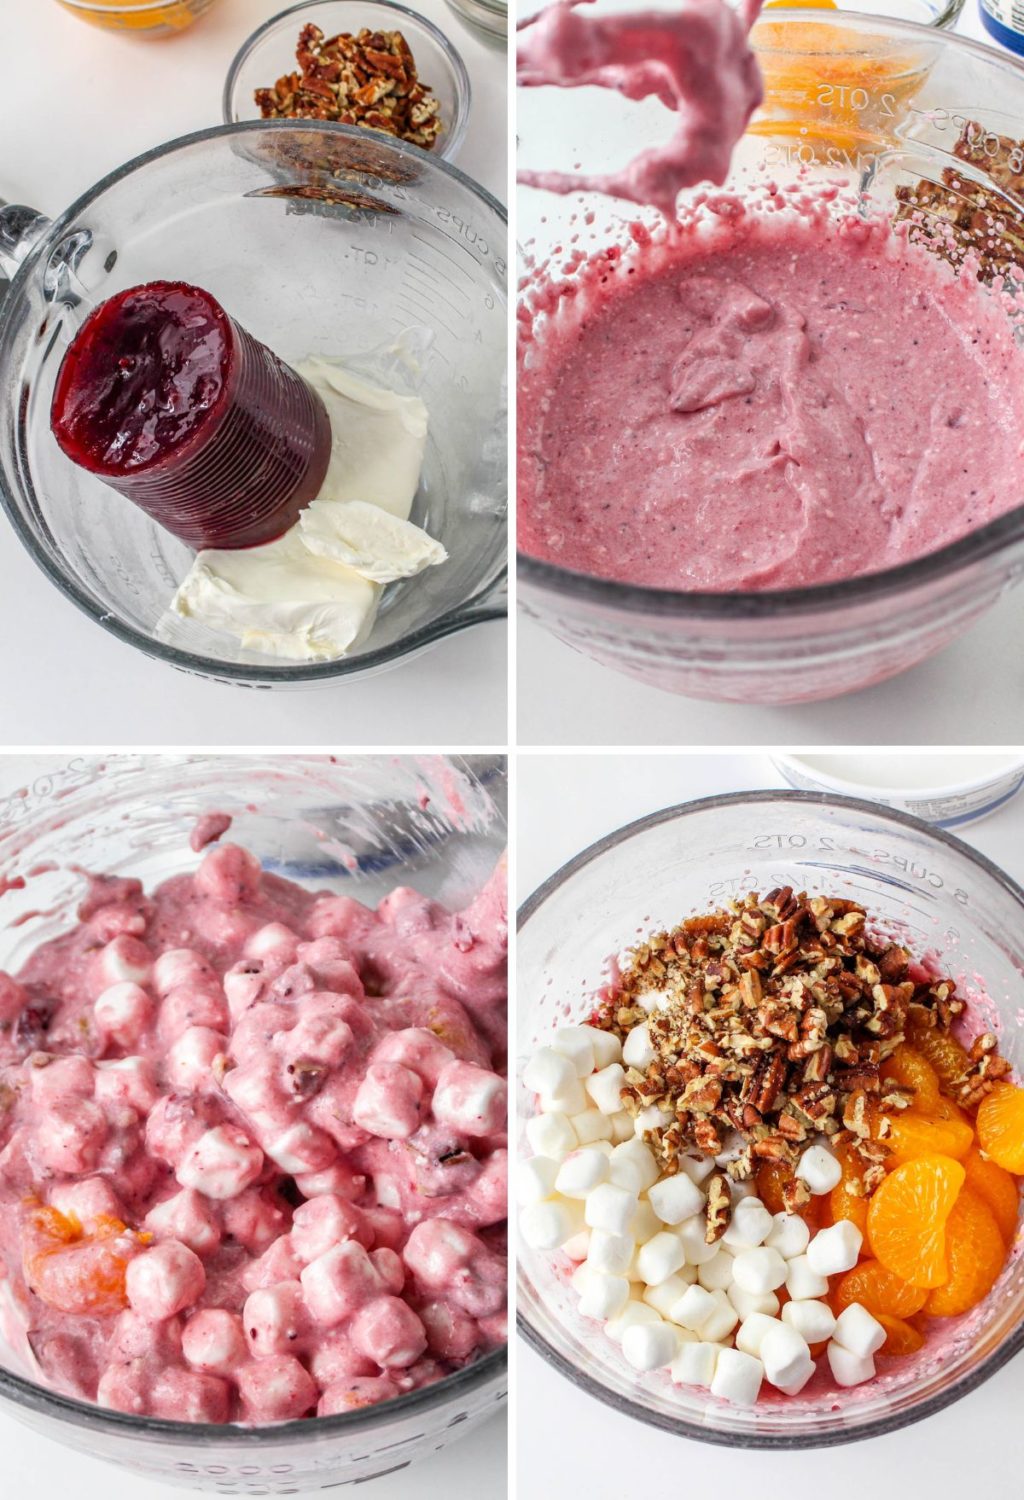 A series of photos showing the process of making a strawberry rhubarb ice cream.